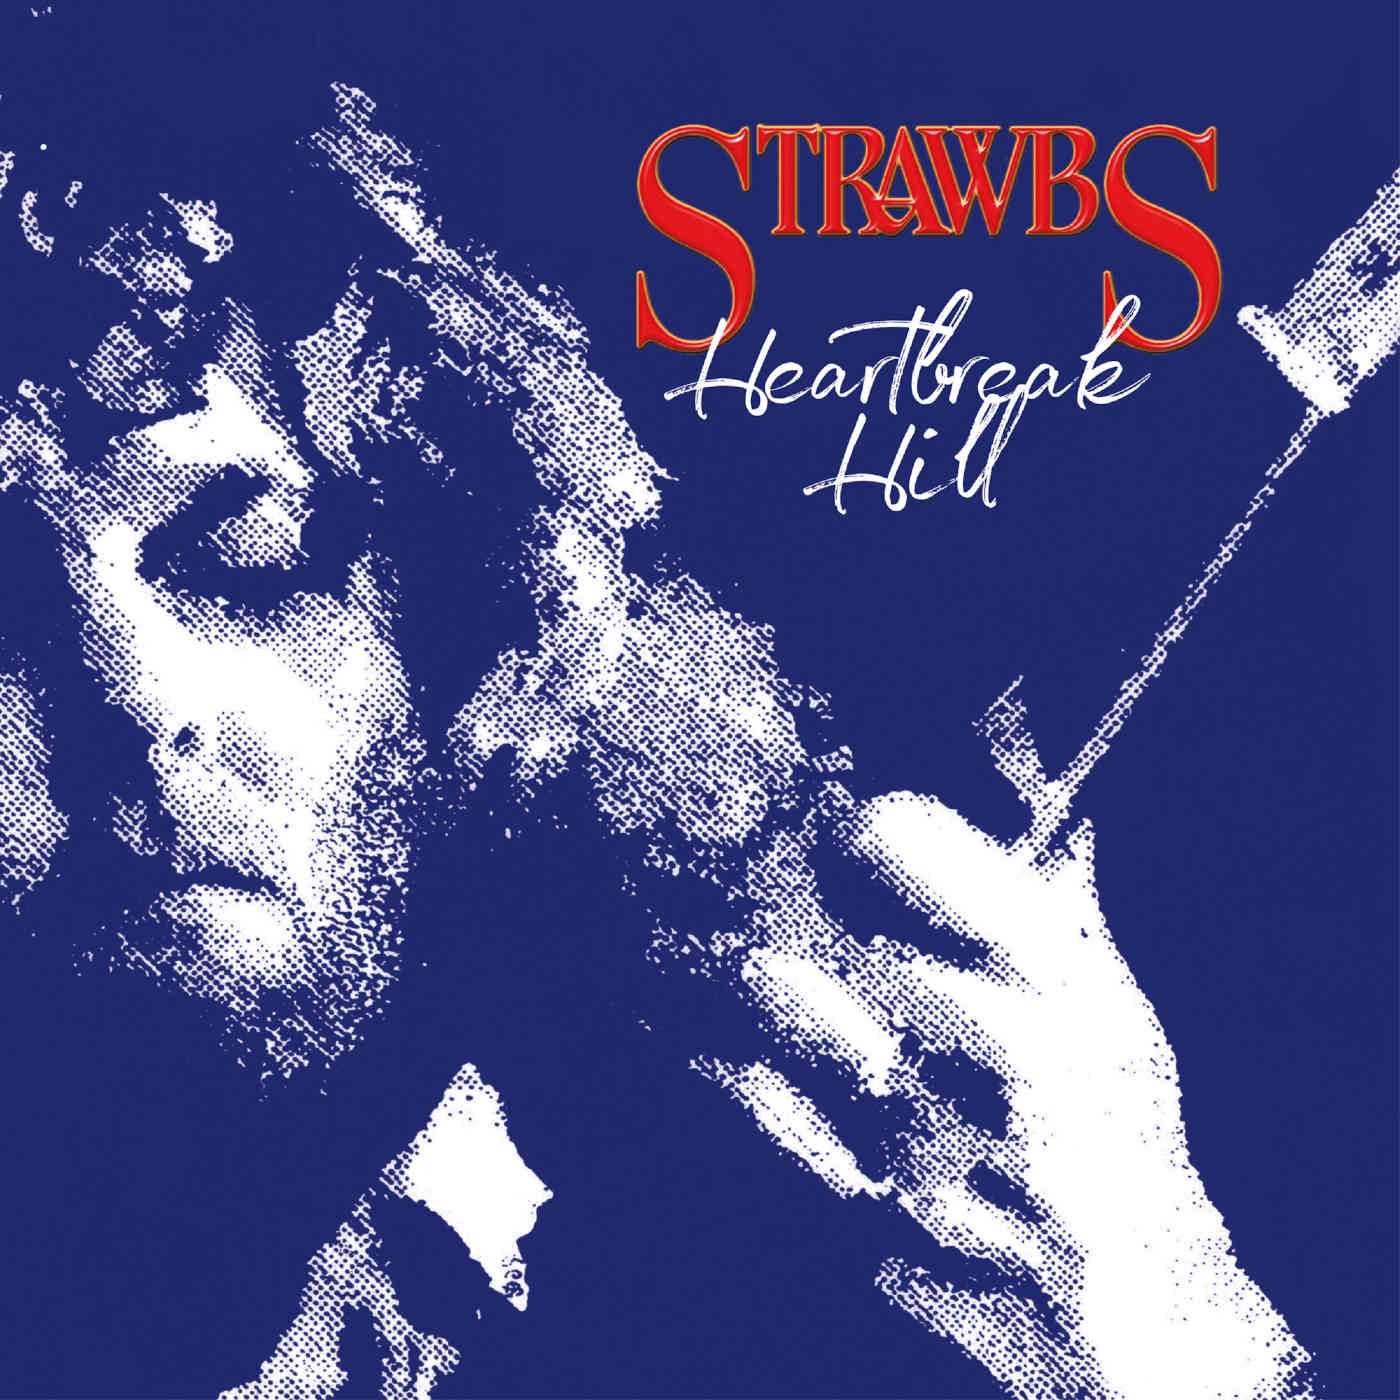 Strawbs - Heartbreak Hill – Remastered & Expanded Edition - CD